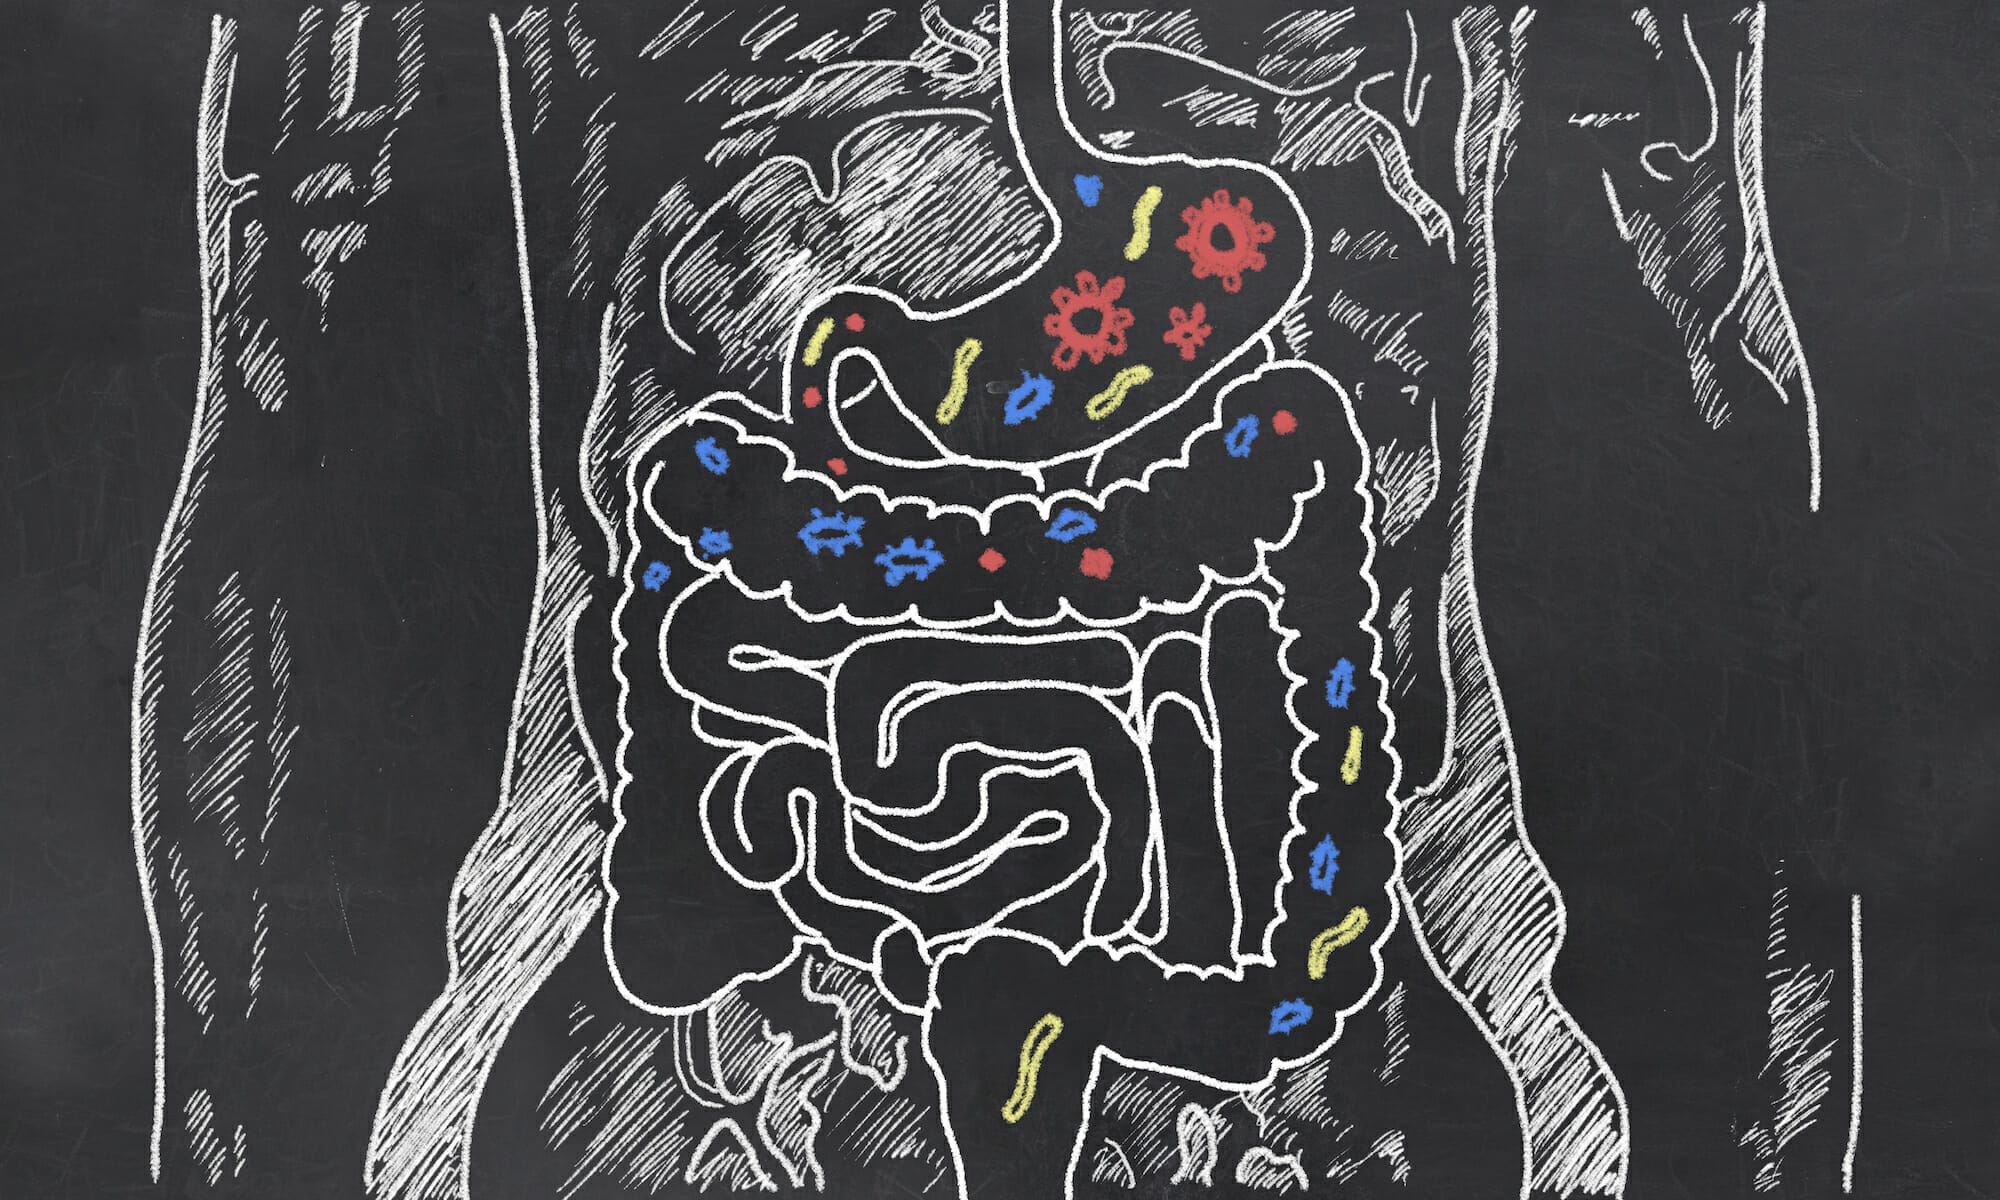 Microbiome - The Connection Between Diet, Disease, and Your Gut